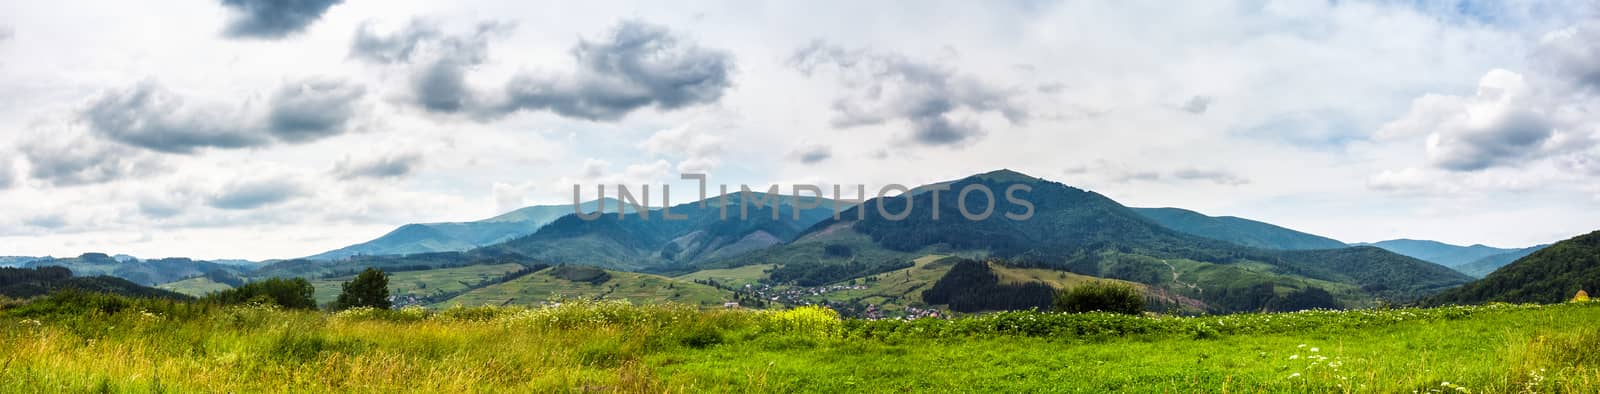 Summer landscape panoramic image of rural fields in mountains under cloudy sky